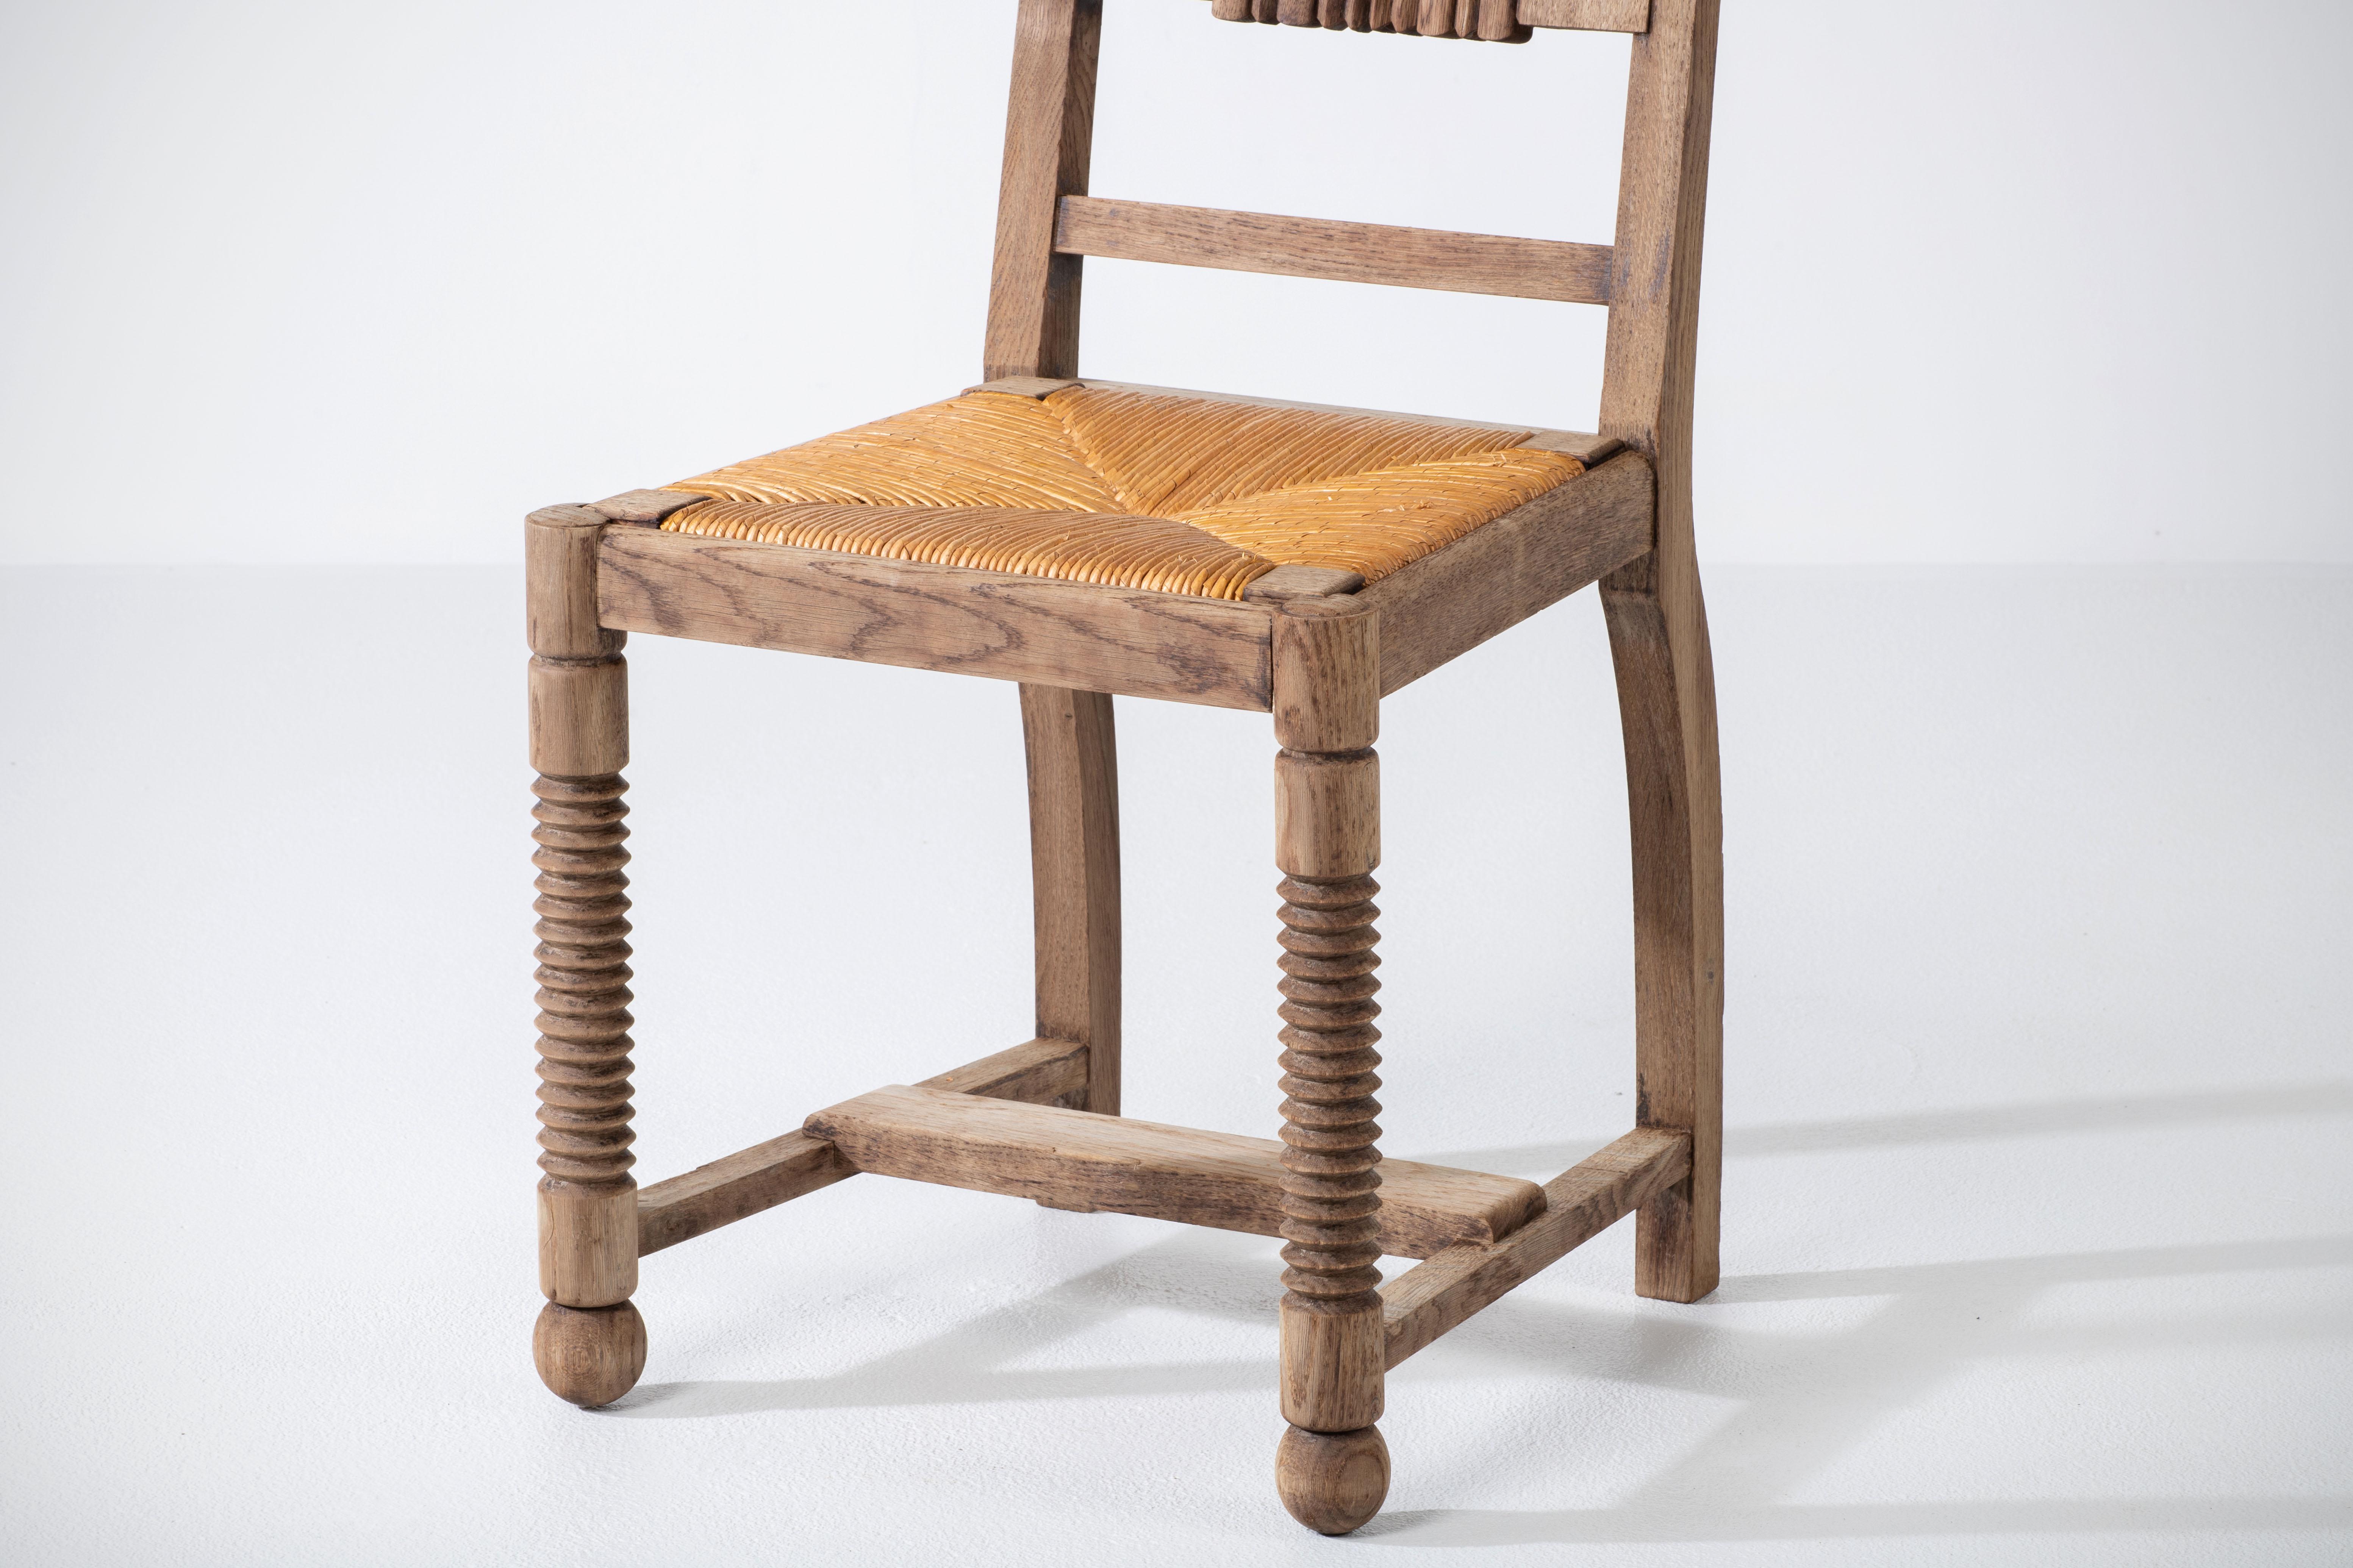 This French Art Deco dining chair in solid oak was created in the 1940s by Charles Dudouyt.

We can clearly see the work of the French school of the 1940s. The detailed and graphic designed backrest panels will meet the standards of the most